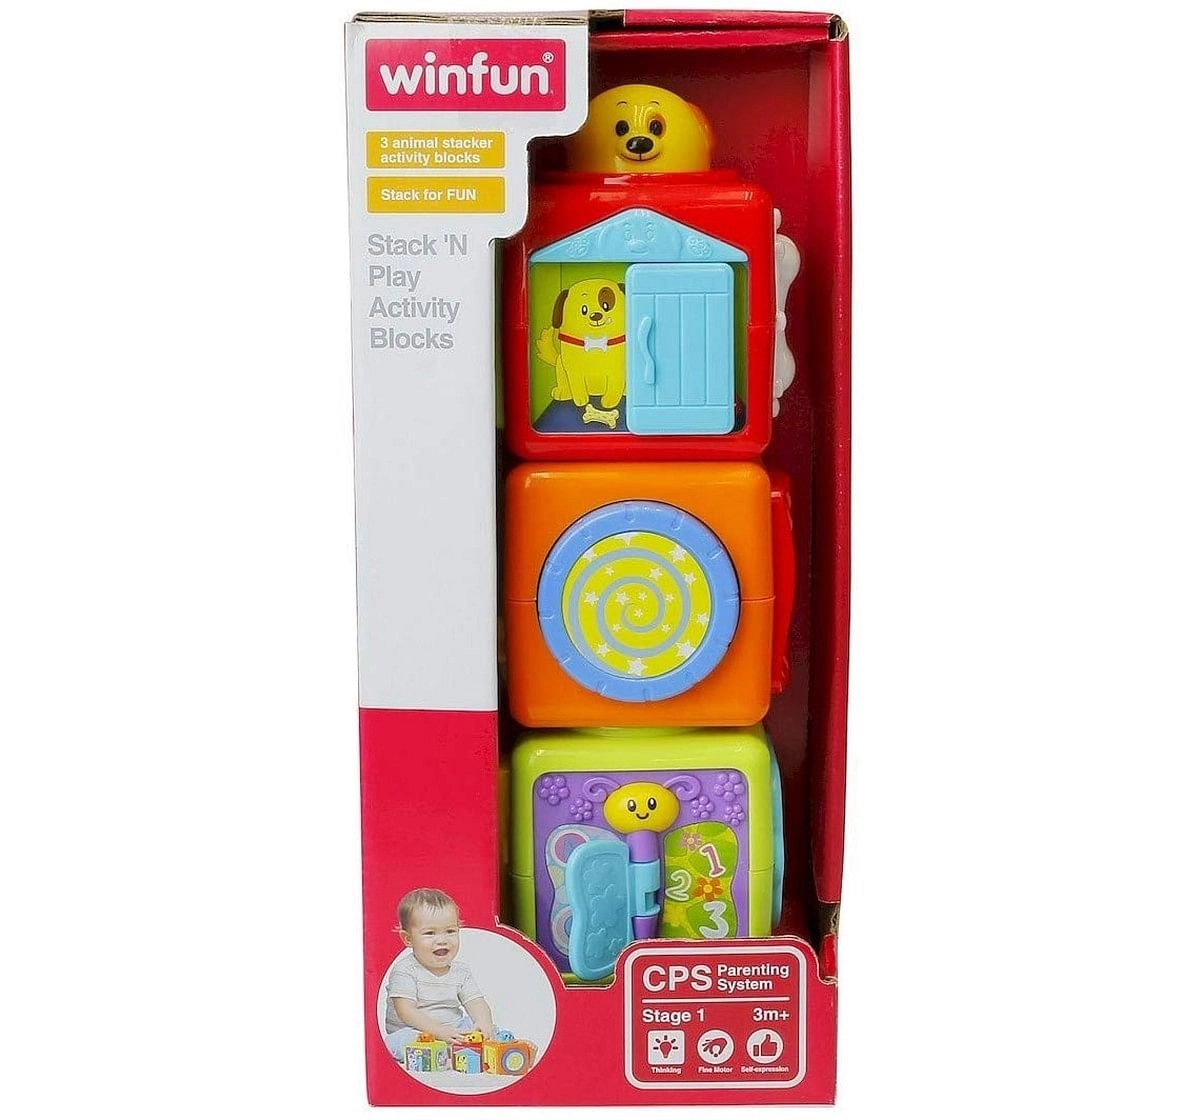 Winfun Stack N Play Activity Blocks Activity Toys for Kids age 3M+ 